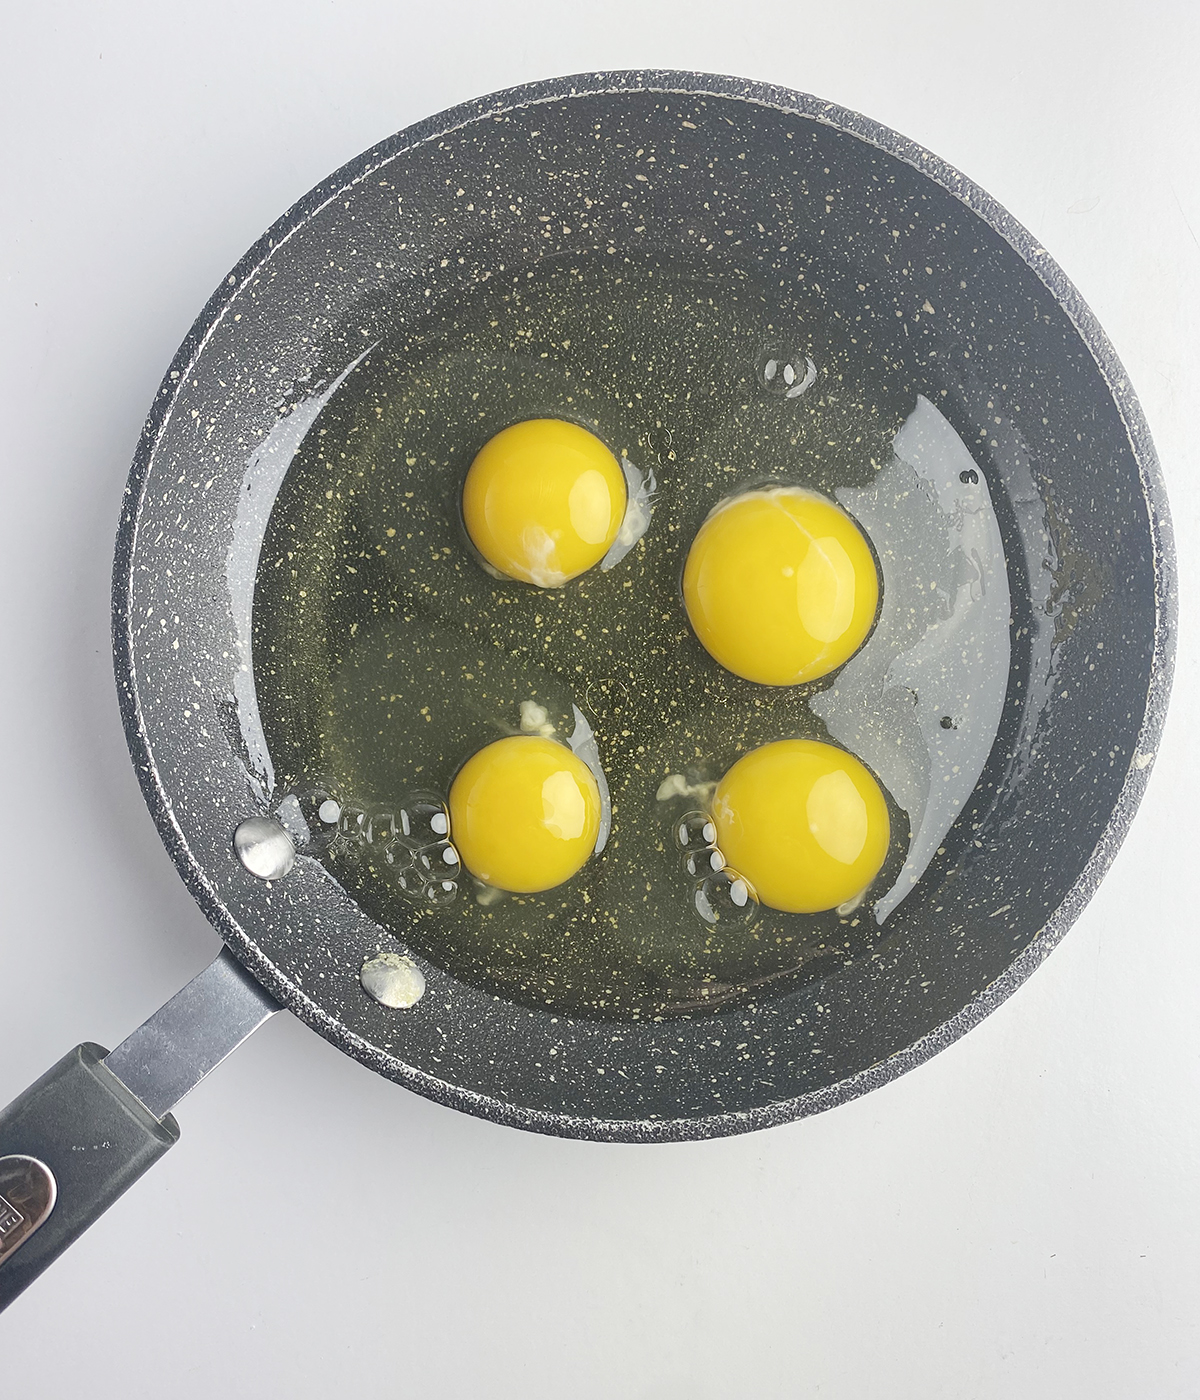 Four eggs in a cool skillet ready to be cooked.